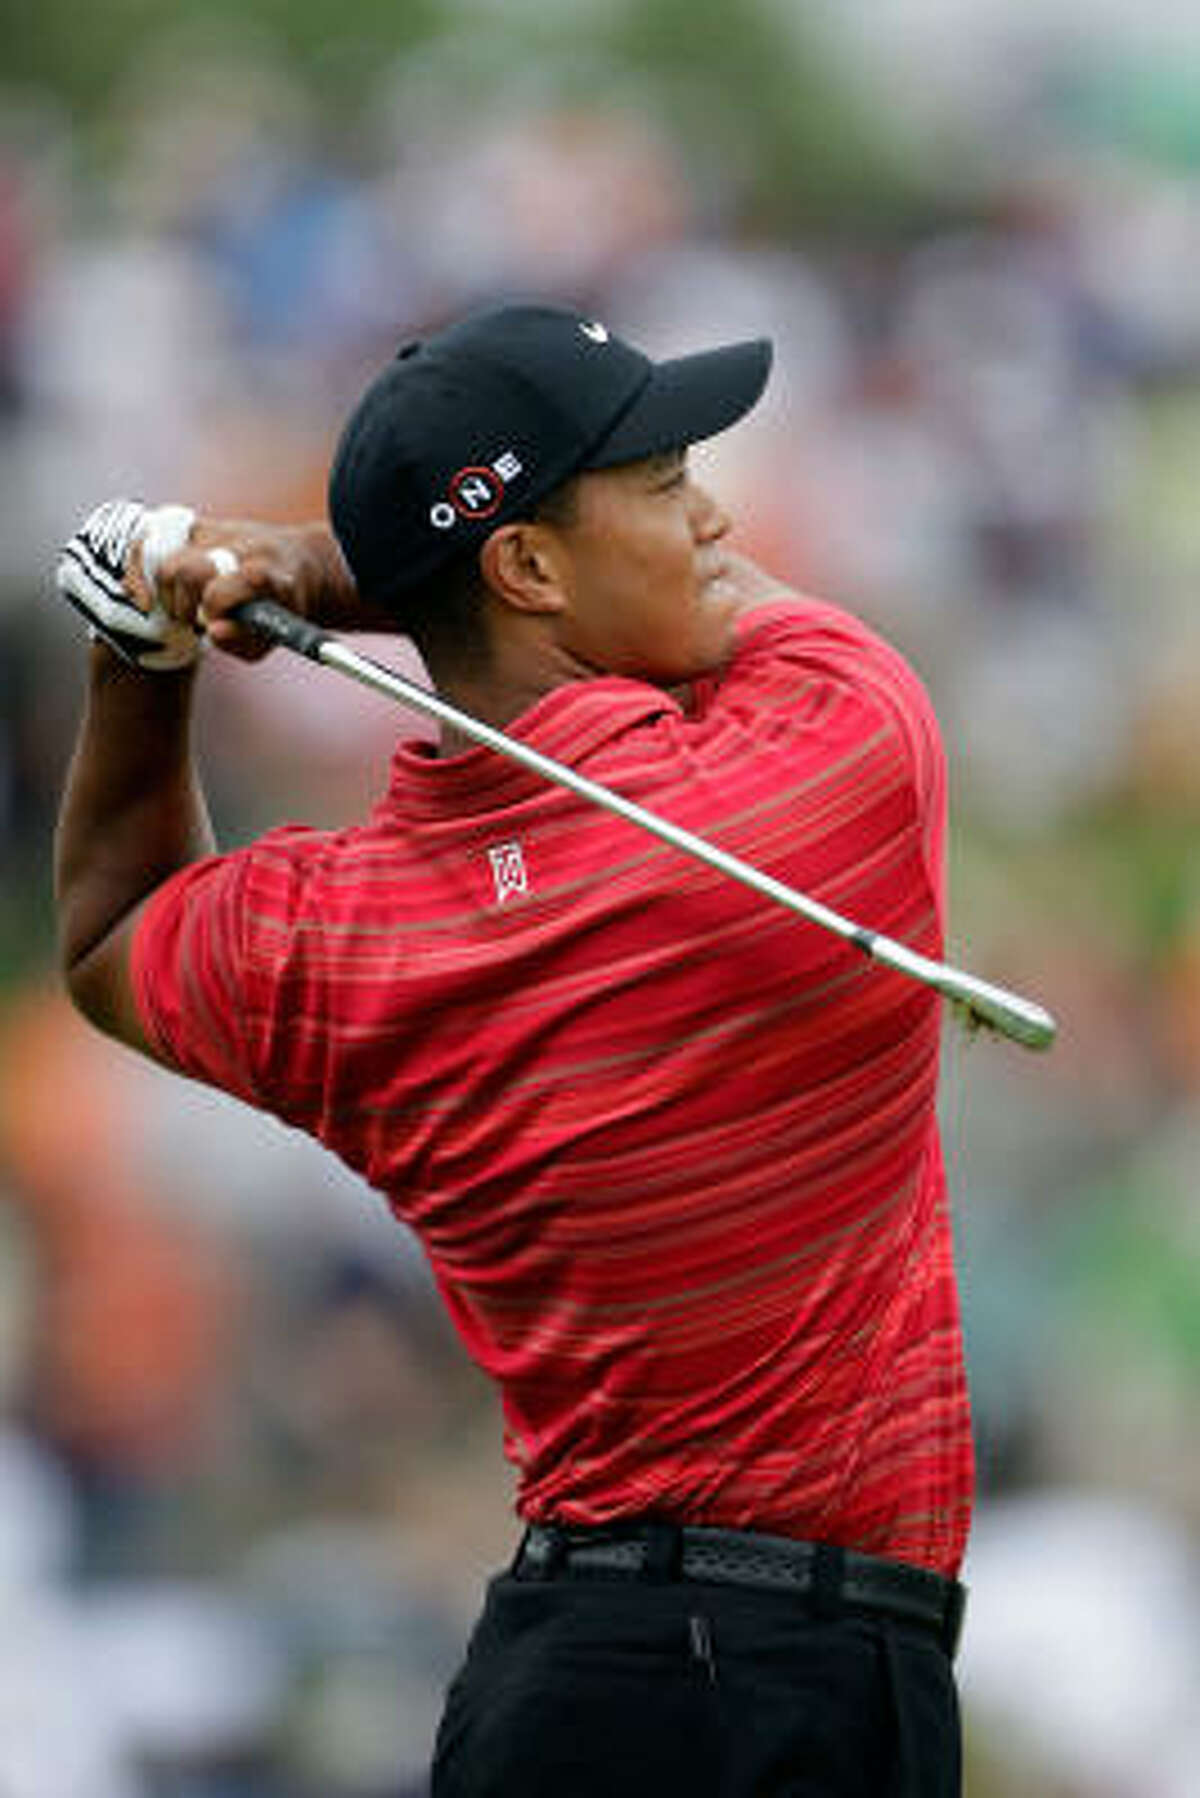 Tiger Woods hits a shot on the practice ground before the final round.